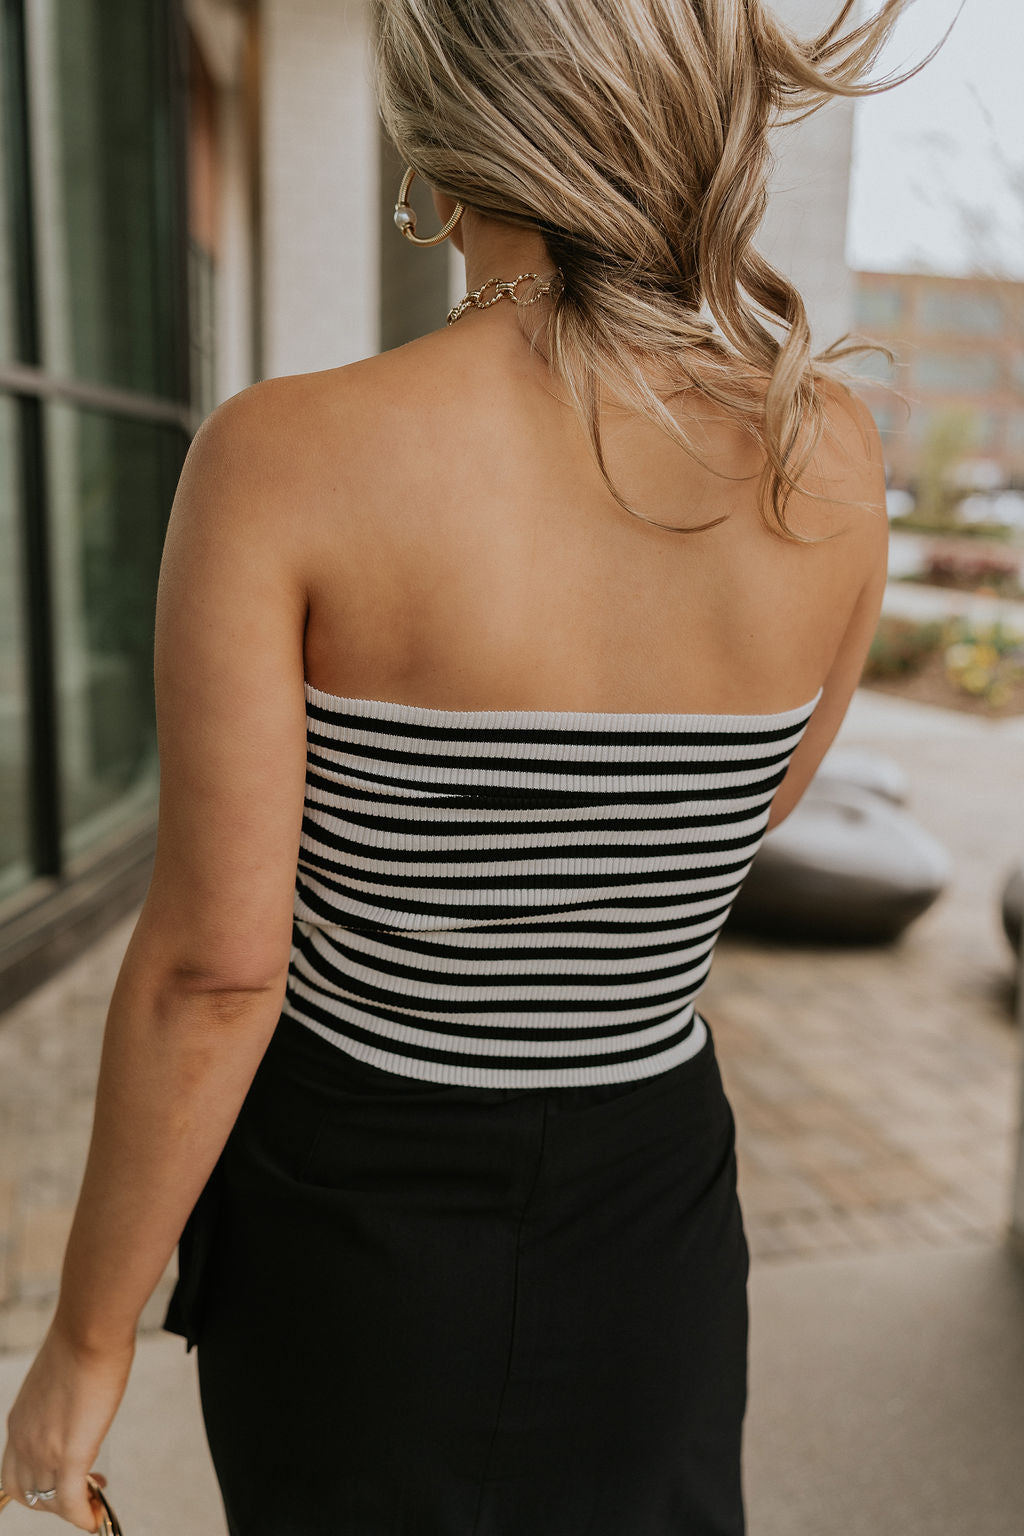 Upper body back view of female model wearing the Londyn White & Black Striped Tube Top that has horizontal white and black stripes and a straight strapless neckline. Worn with black skirt.